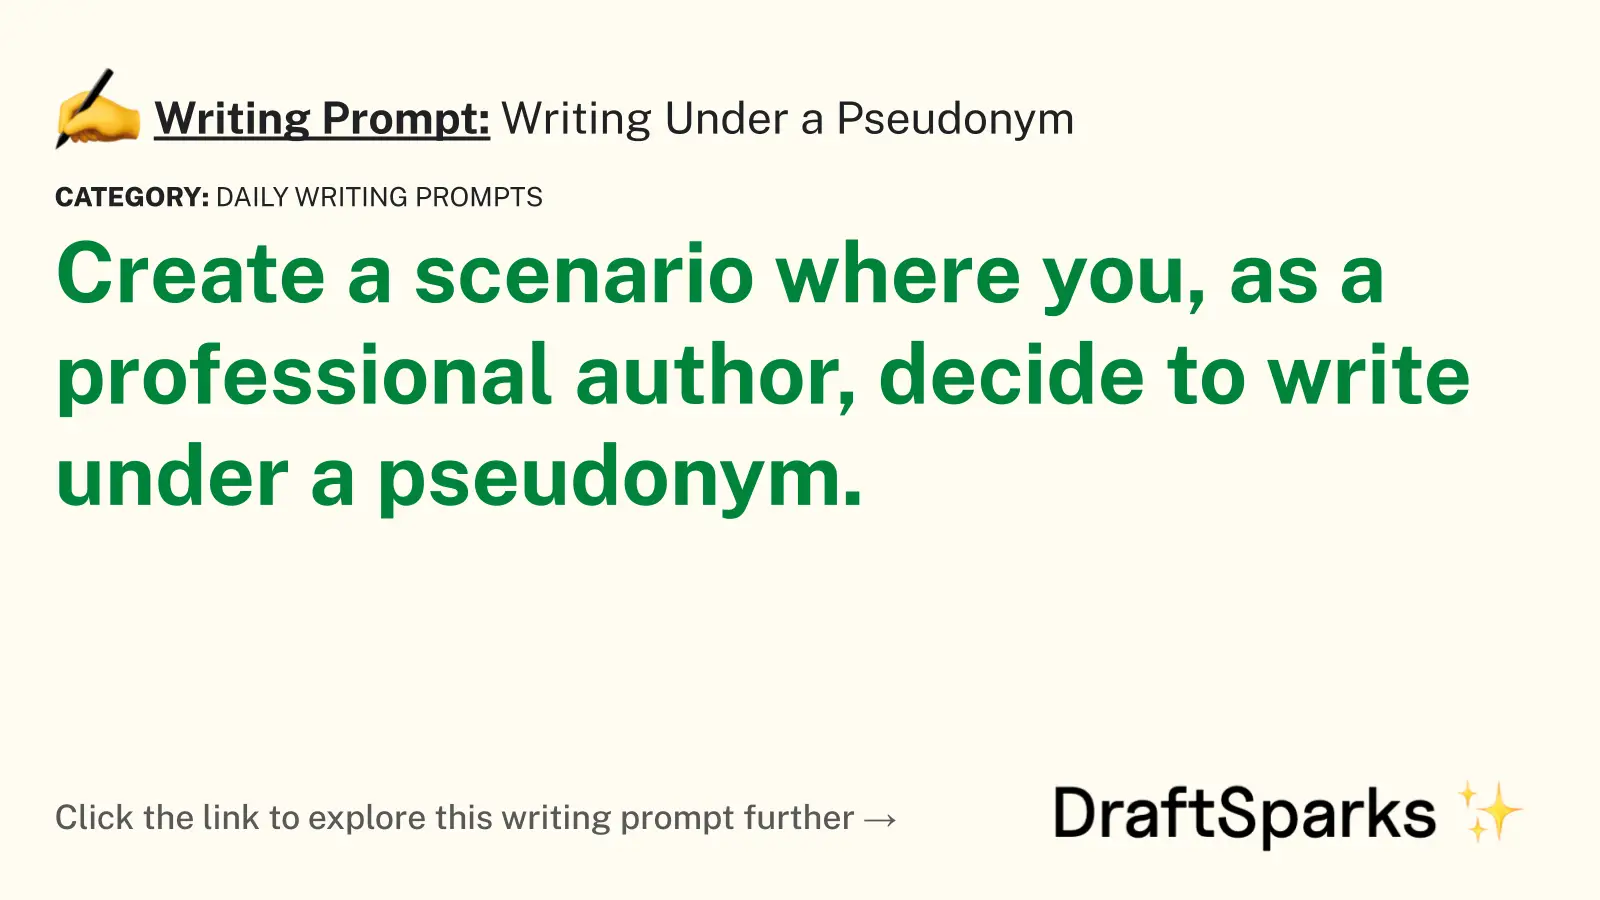 Writing Under a Pseudonym